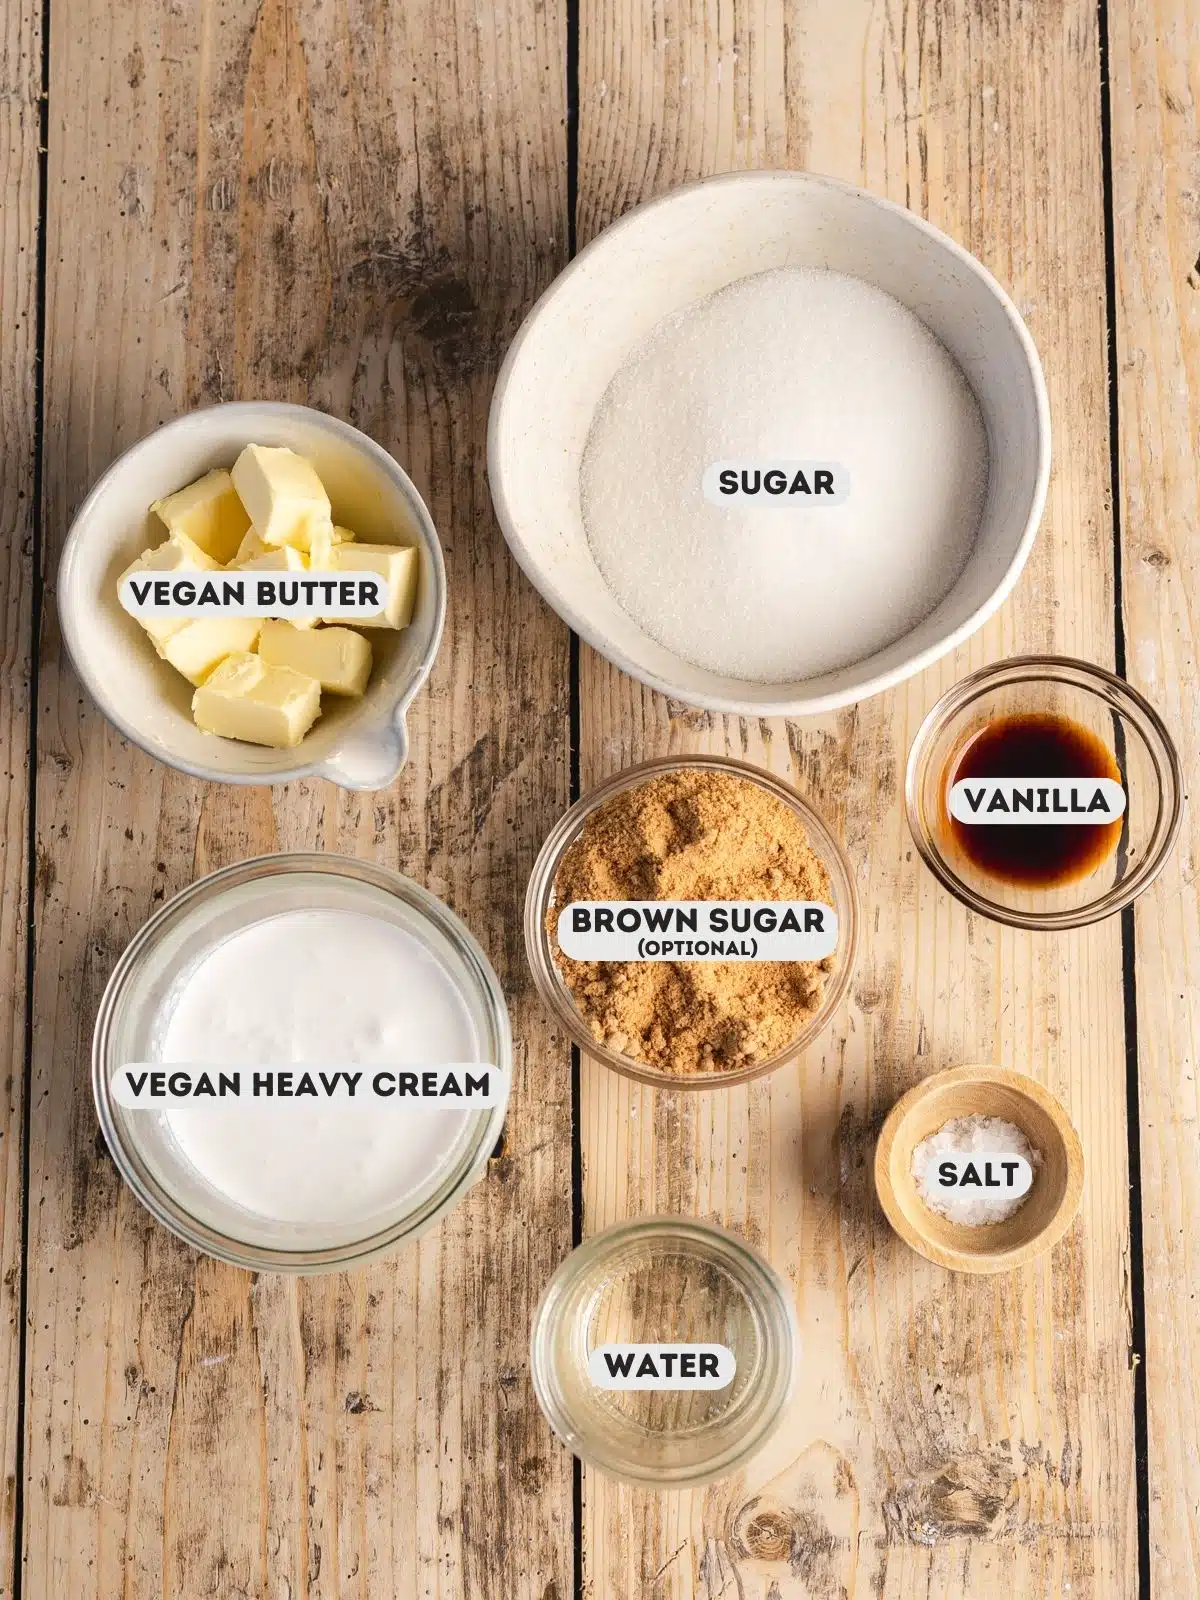 ingredients for vegan caramel sauce measured out in bowls on a wooden table with text overlay.